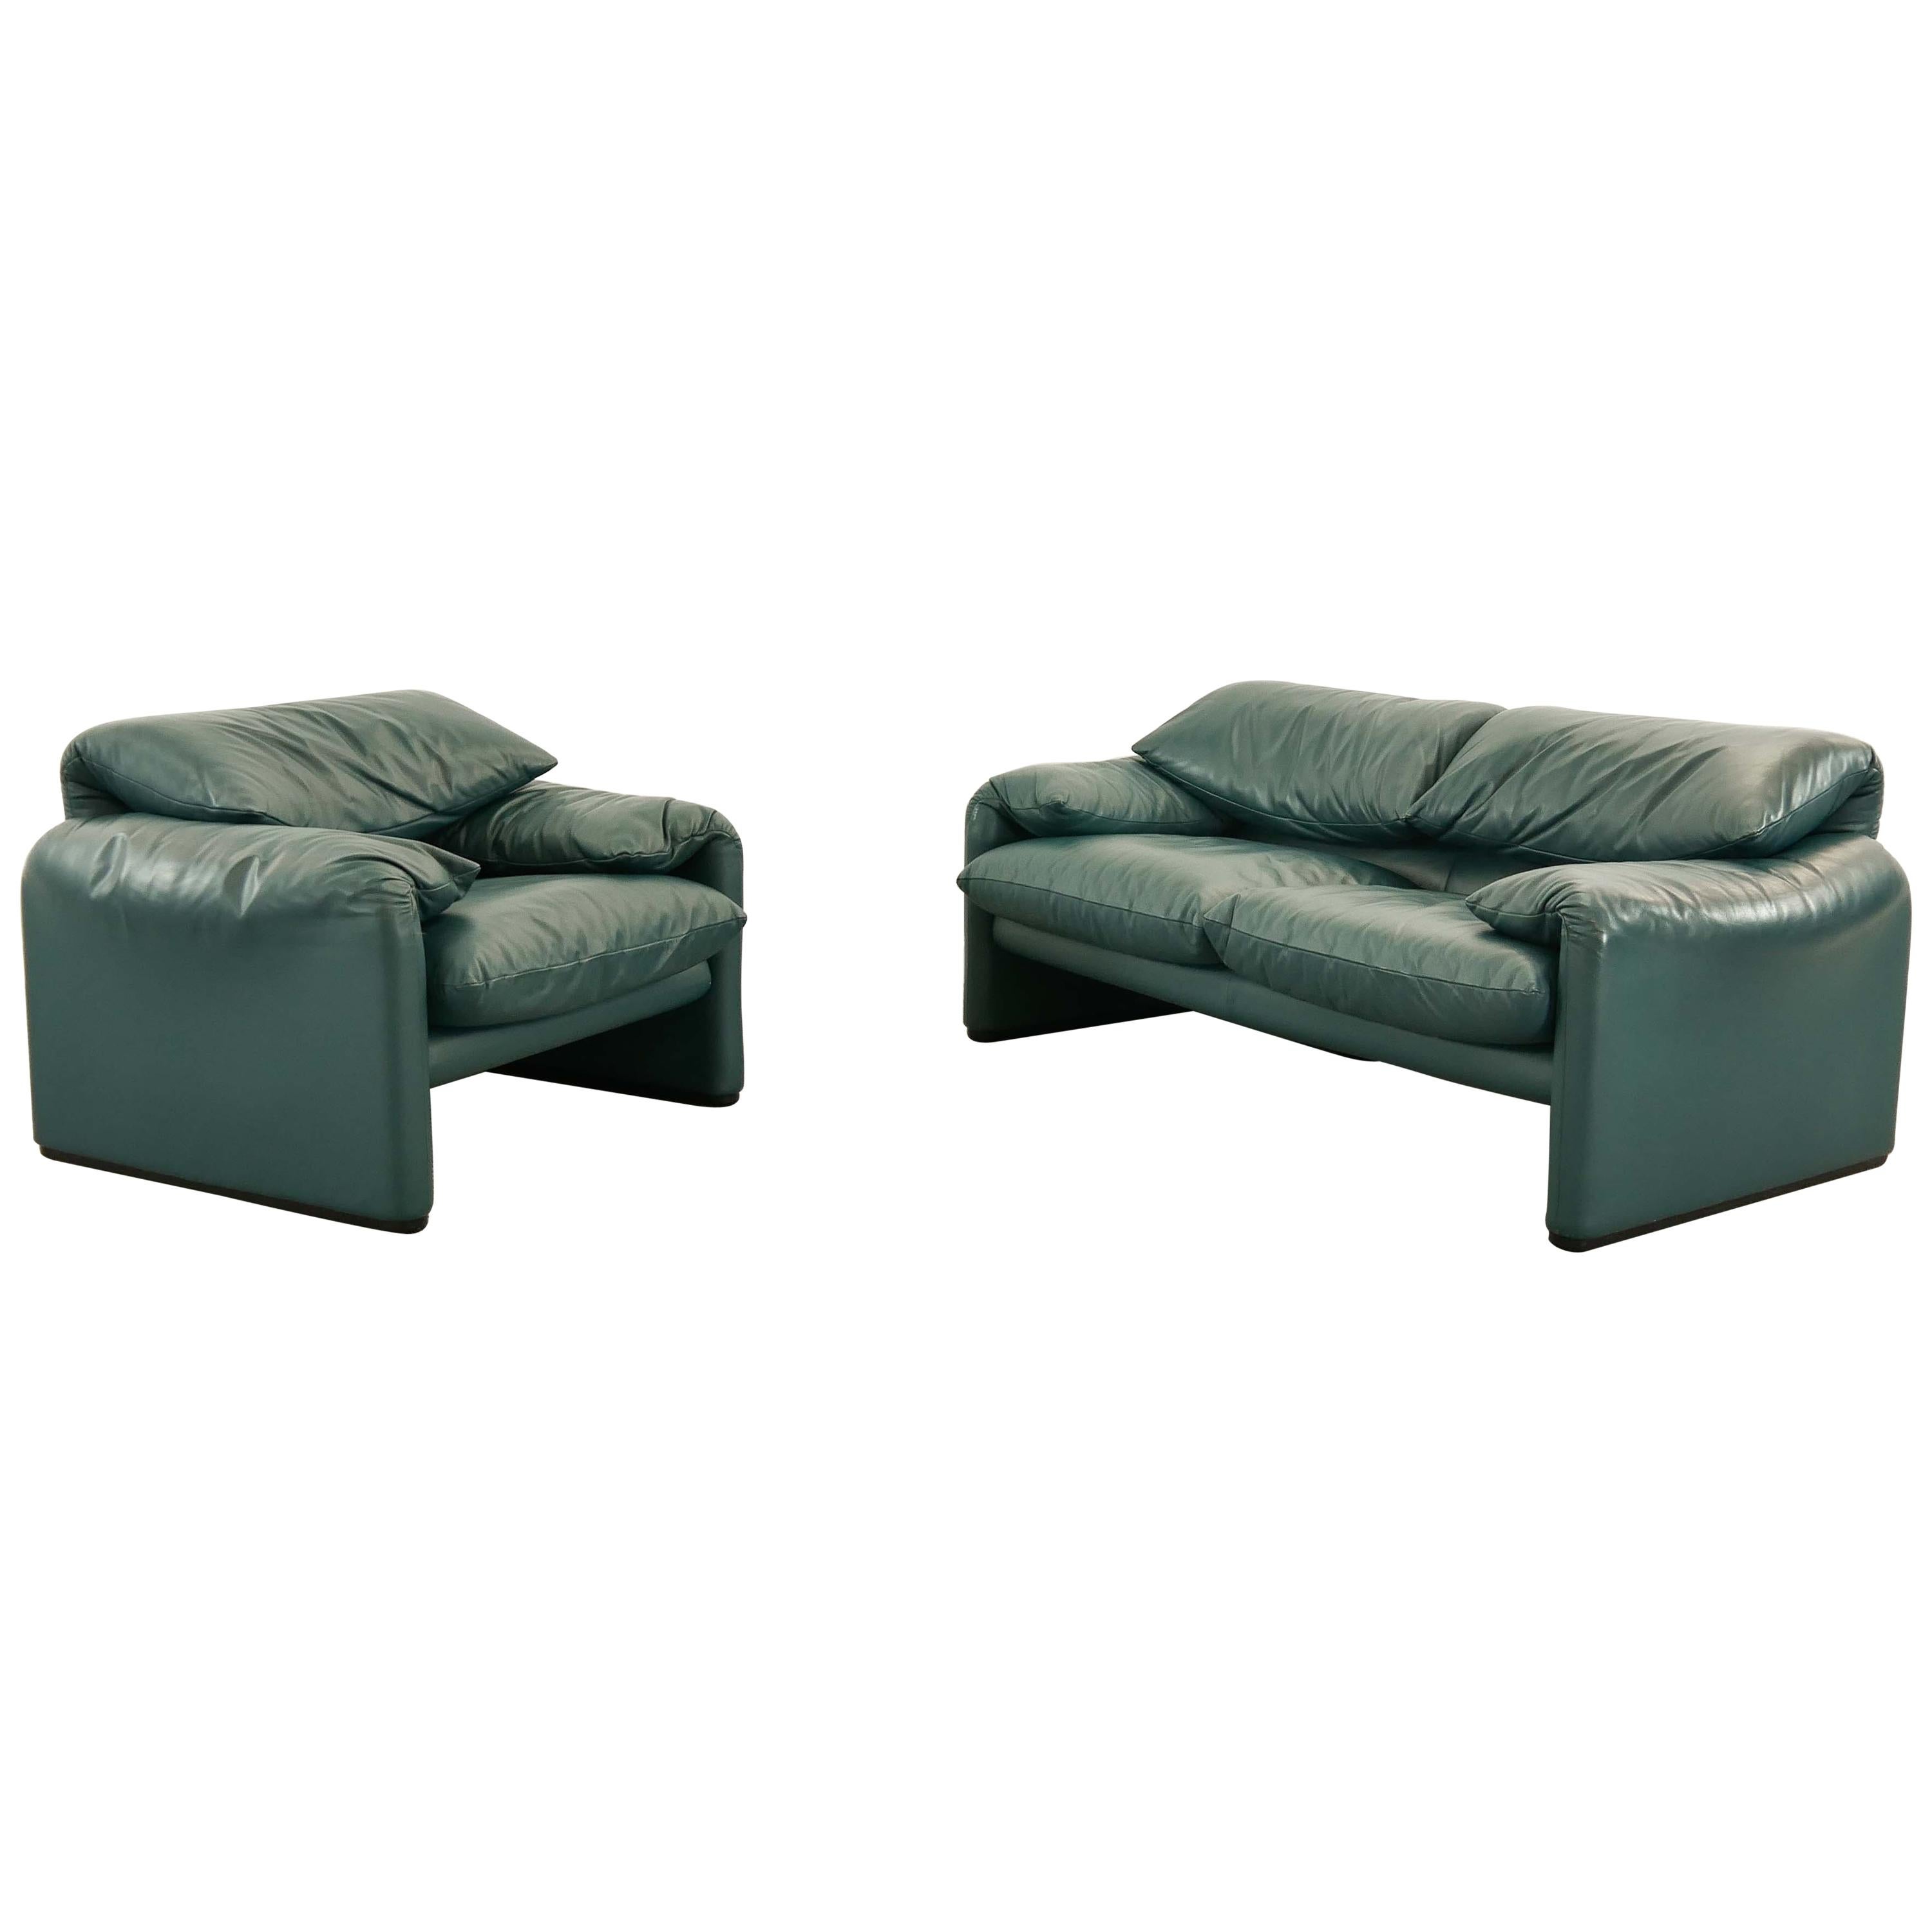 Set Cassina Maralunga 2-Seat Sofa and Easy Chair by Vico Magistretti in Leather